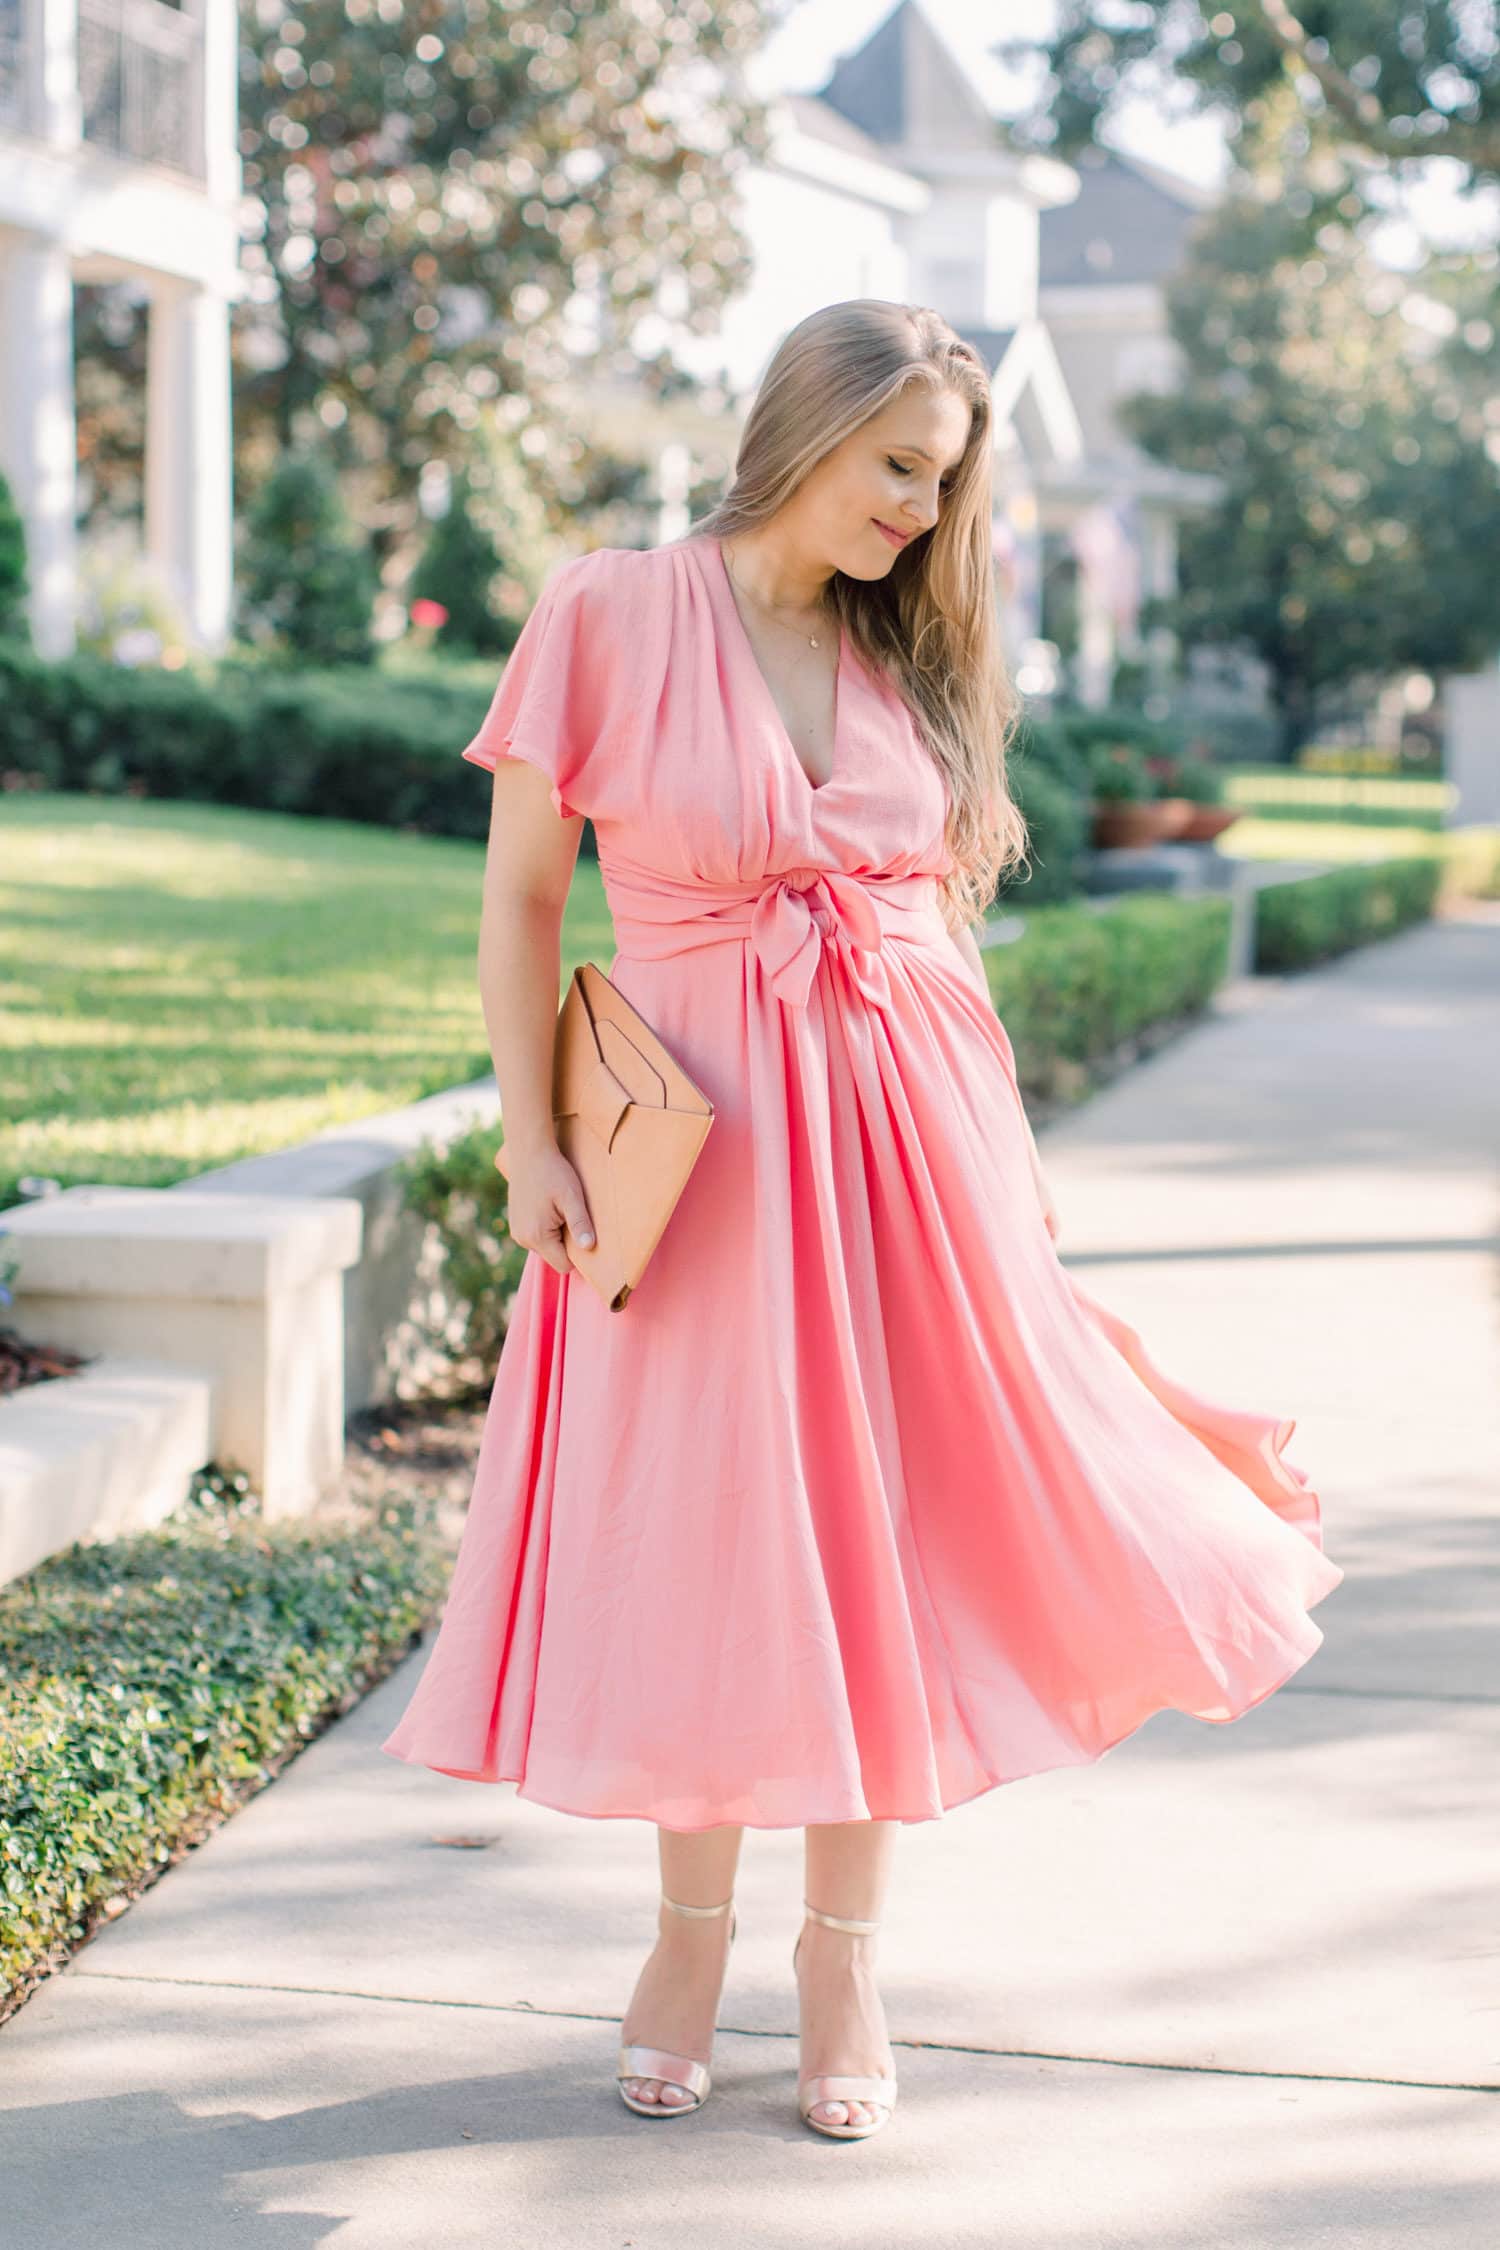 the perfect wedding guest dress